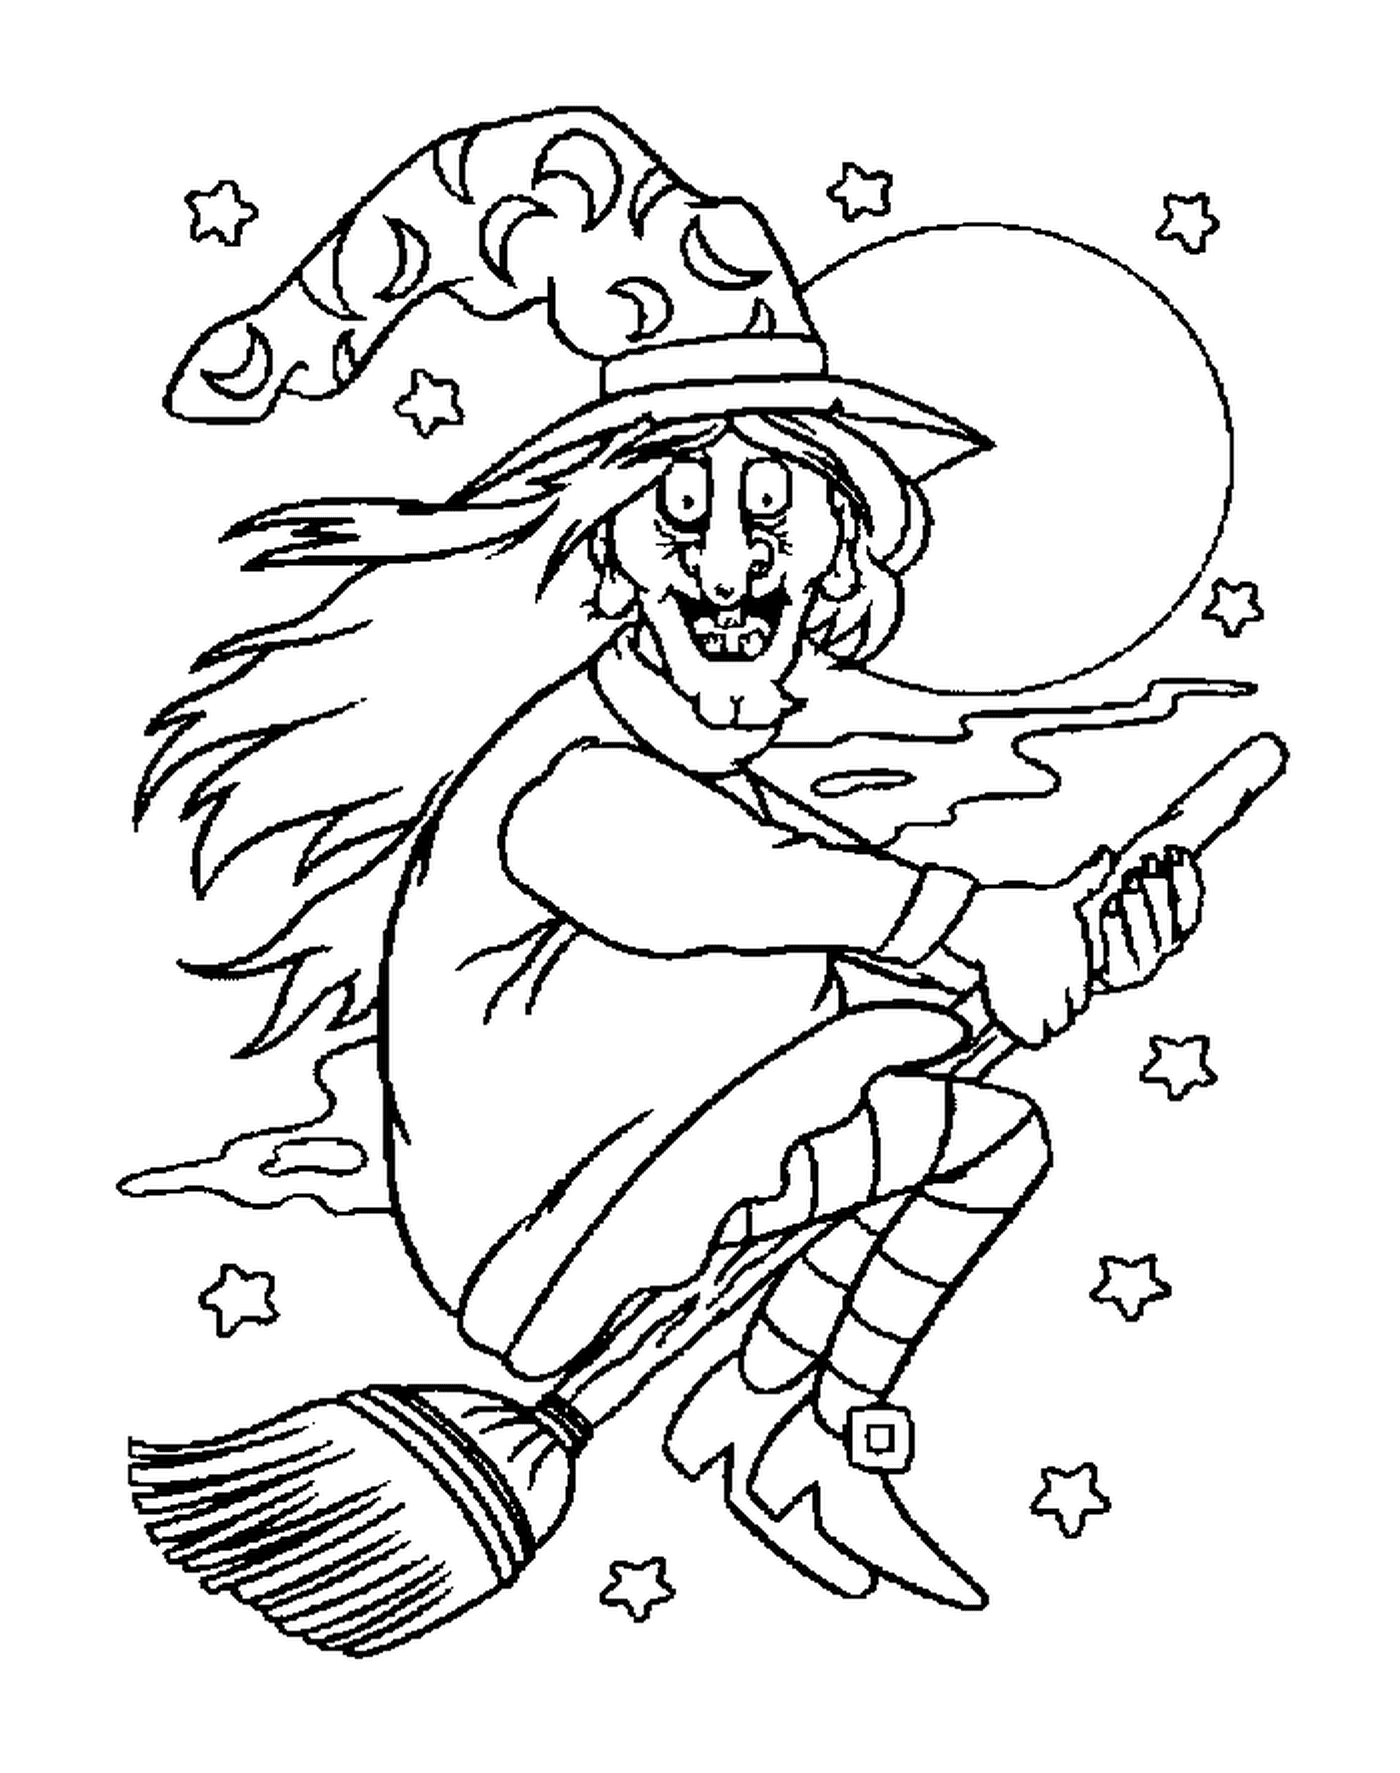  Witch flying on his broom in a starry night 